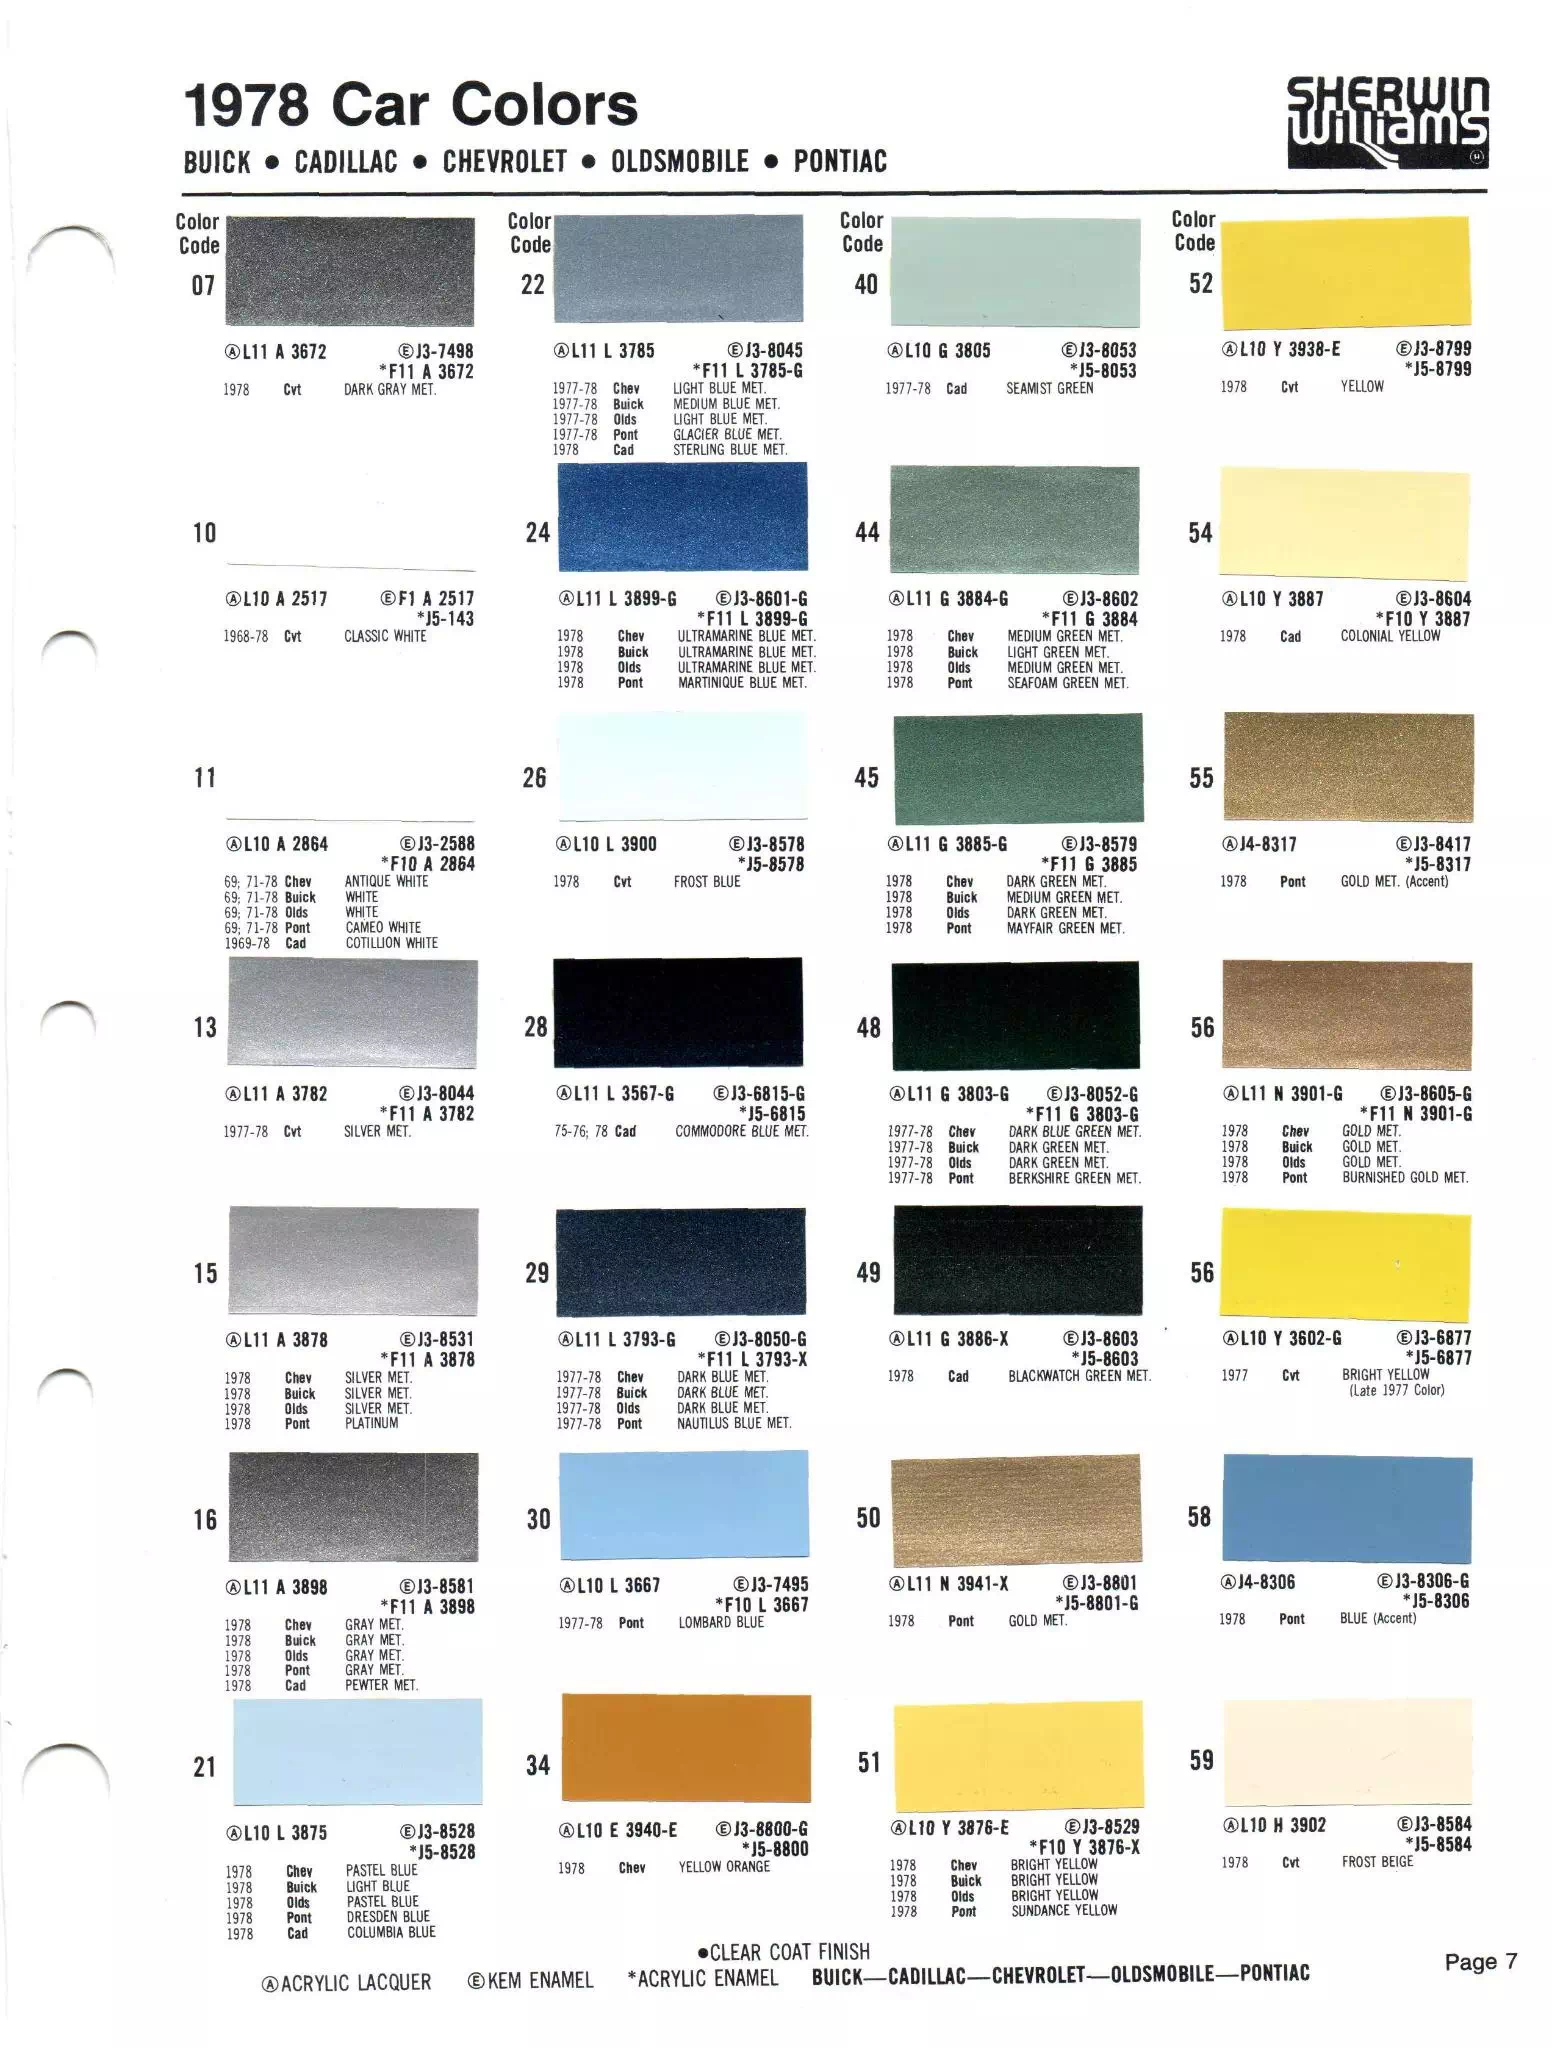 Colors, Descriptions, Codes, and Paint Swatches for General Motors Vehicles in 1978